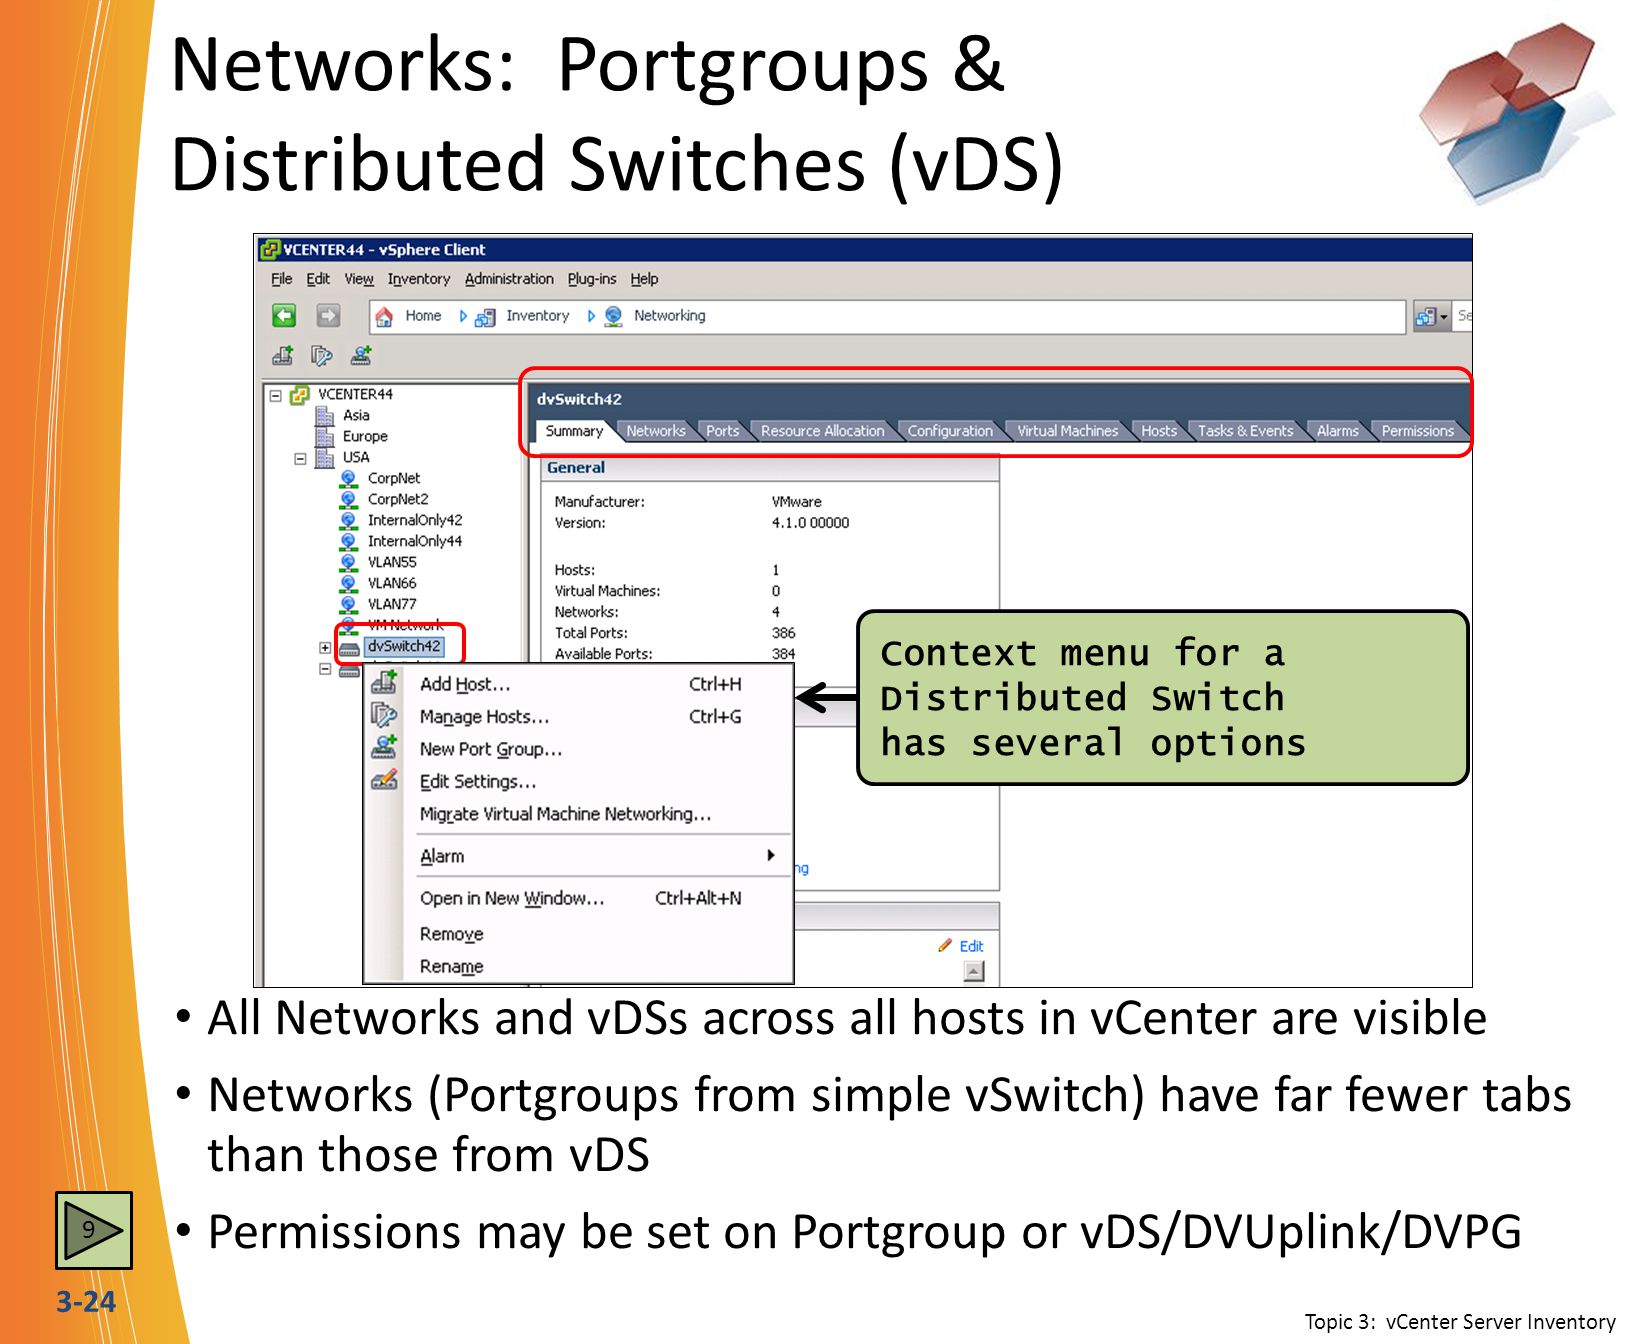 Networks: Portgroups & Distributed Switches (vDS)